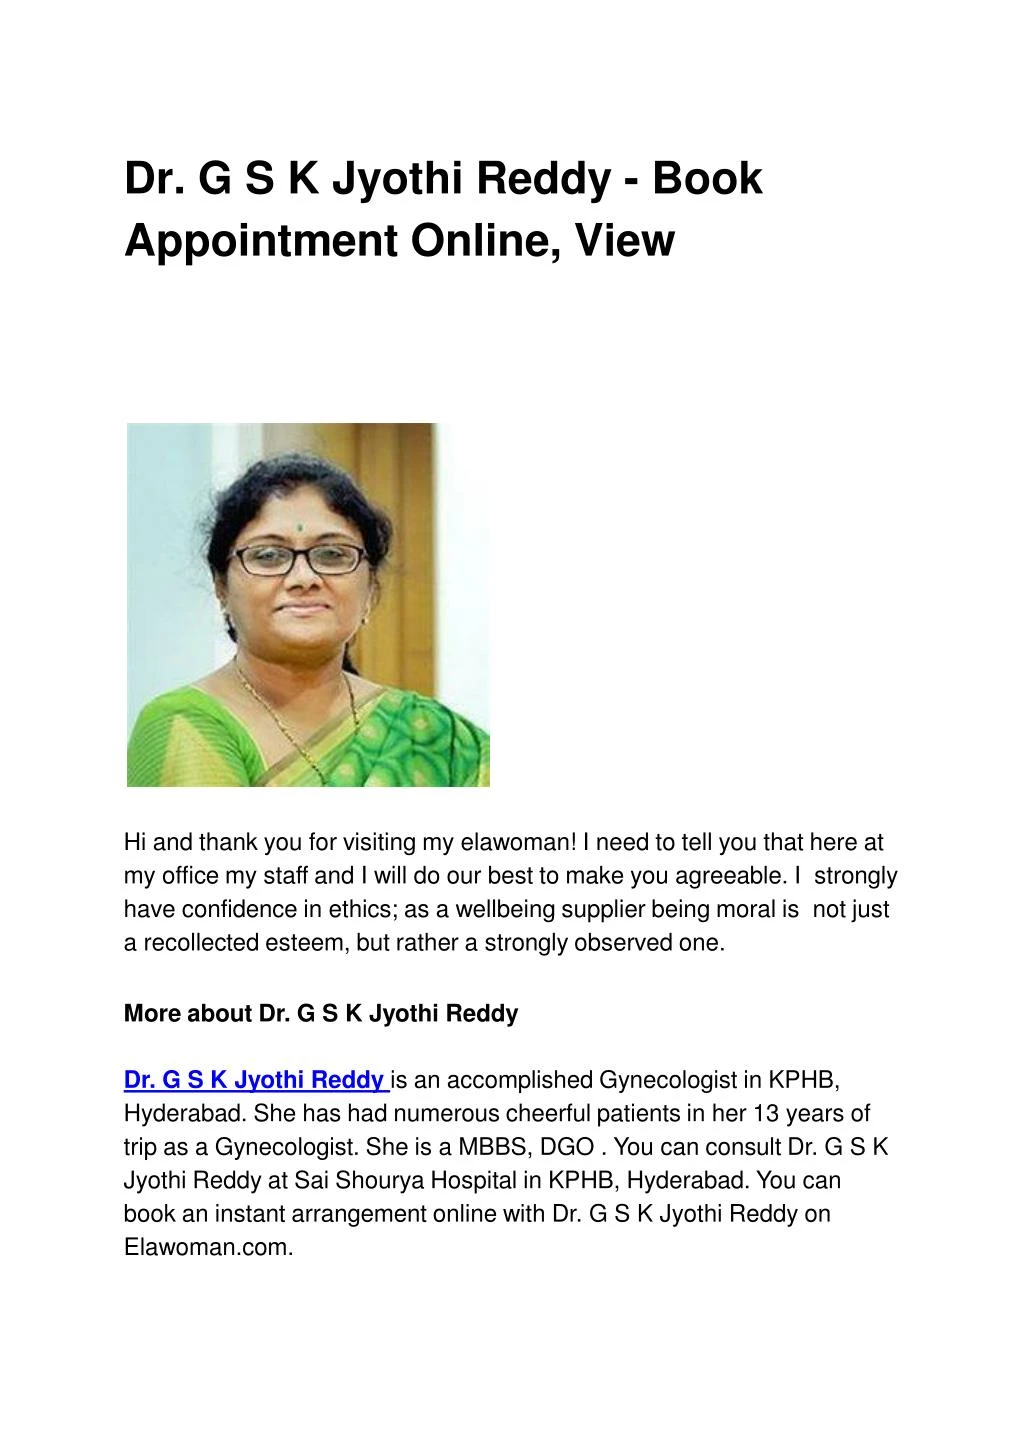 dr g s k jyothi reddy book appointment online view